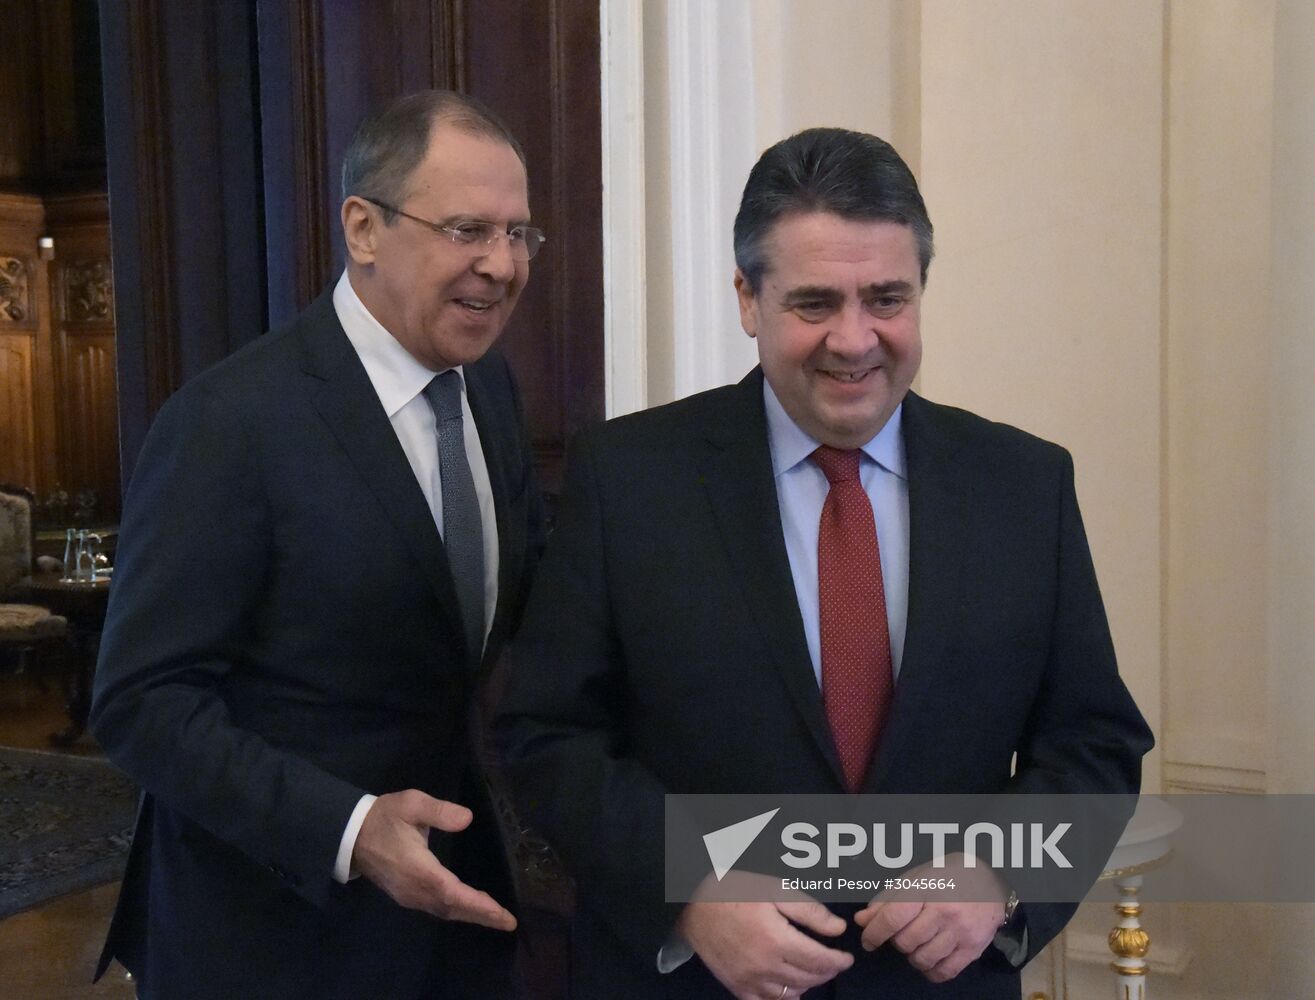 Russian Foreign Minister Sergei Lavrov's meeting with German Foreign Minister Sigmar Gabriel